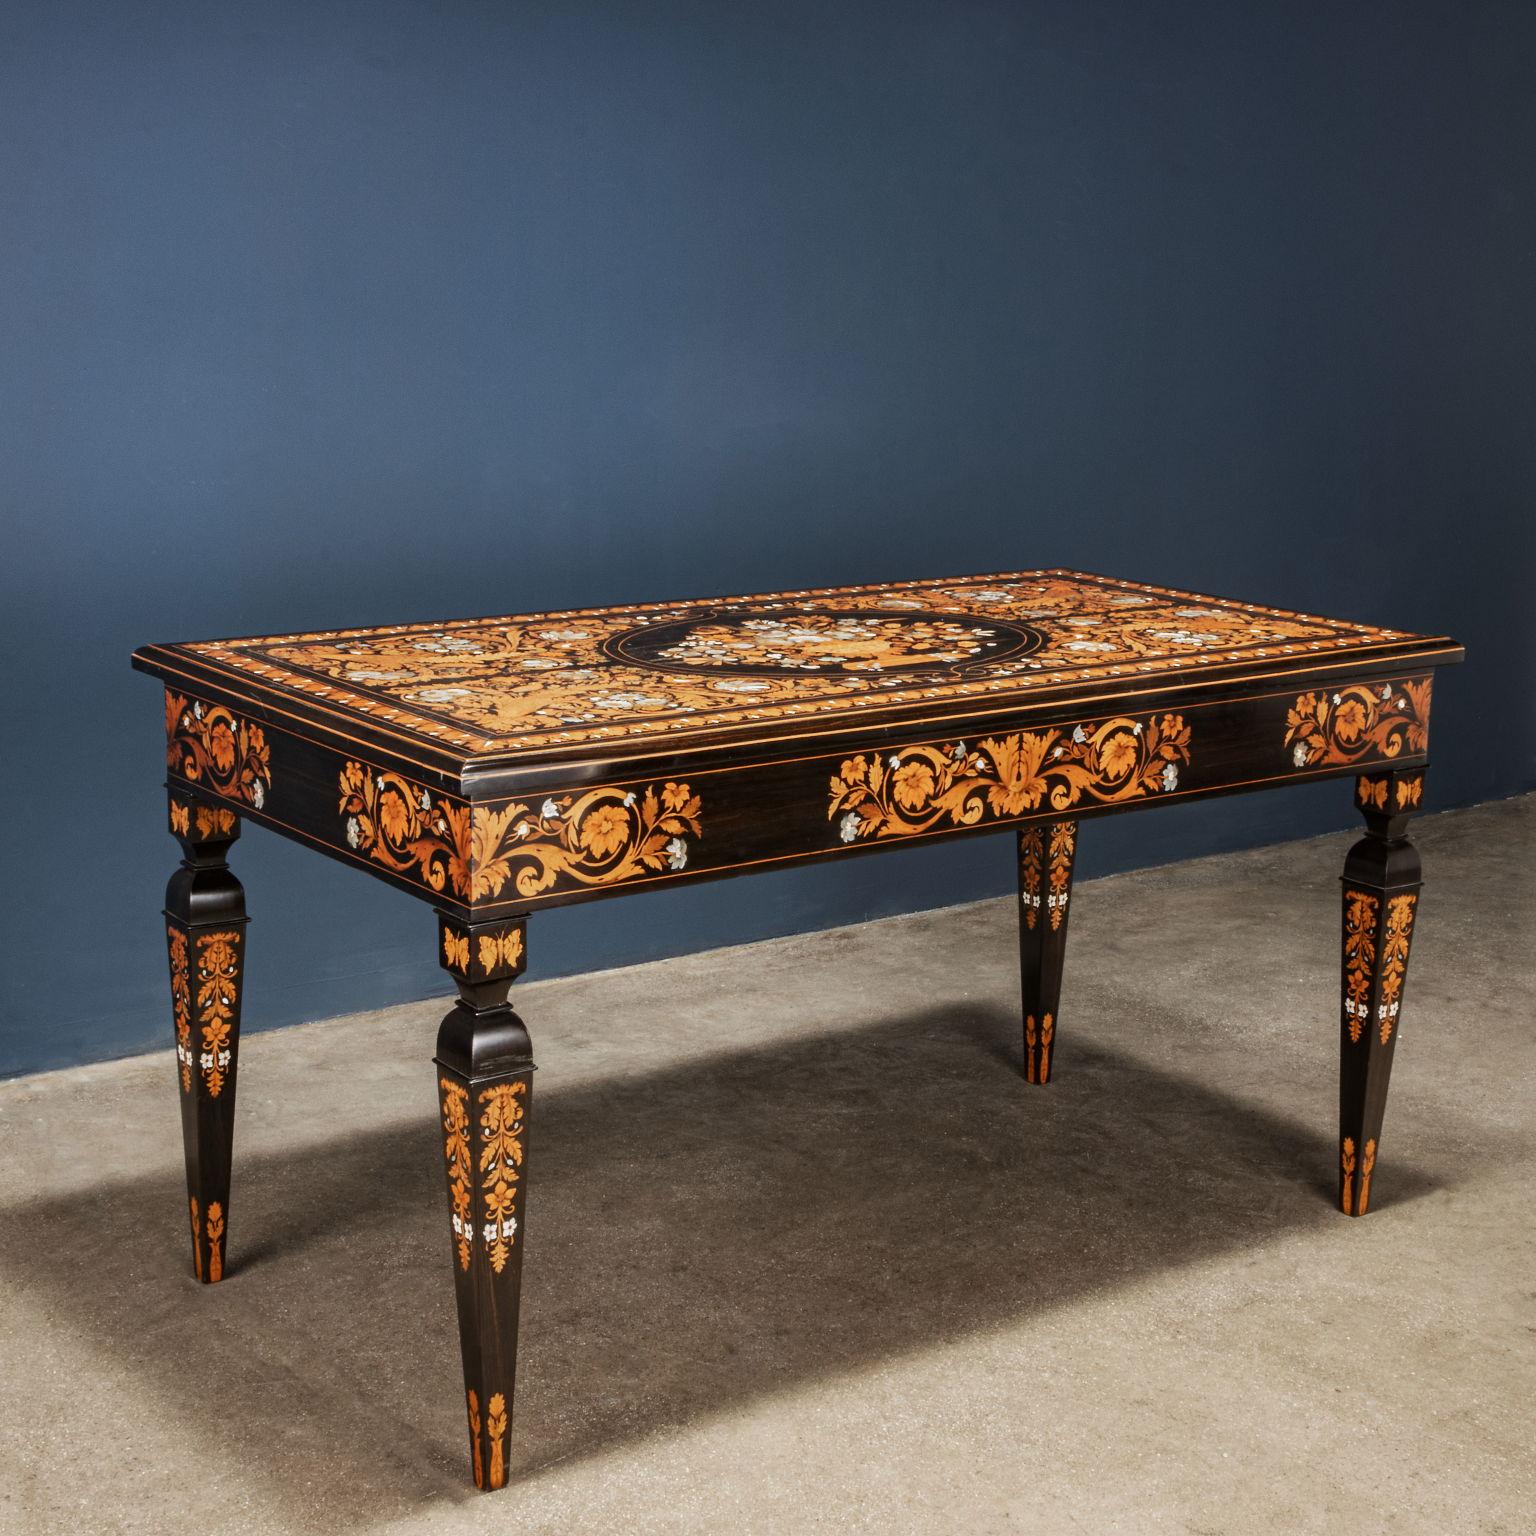 Rectangular table made of chestnut wood veneered in dark walnut and inlaid with various woods, mother of pearl and bone. The inlay with floral motifs presents the top starting from four mirror reserves created around the central oval reserve where a